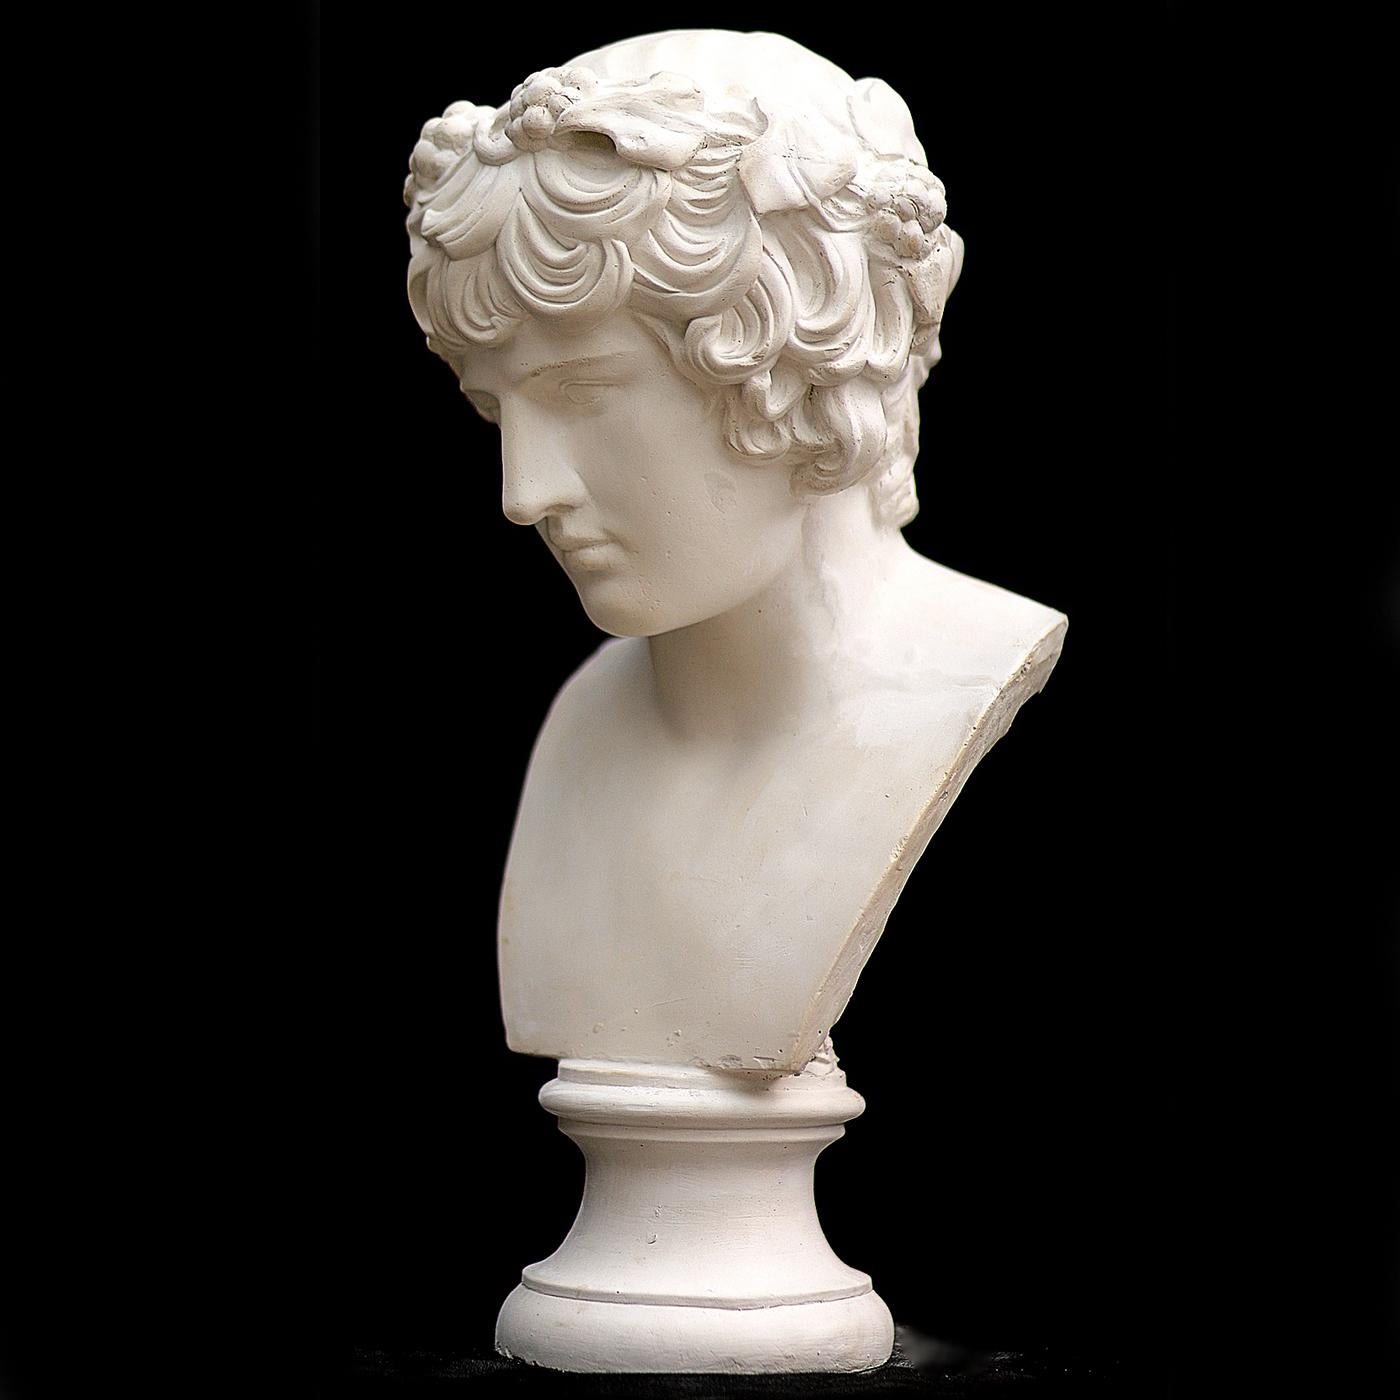 This handmade work is a reproduction of a piece currently housed in the British Museum in London. The bust of the young, Ancient Greek hero Antinous is famed for its lifelike depiction of human features, including a rounded chin; fleshy mouth; wide,